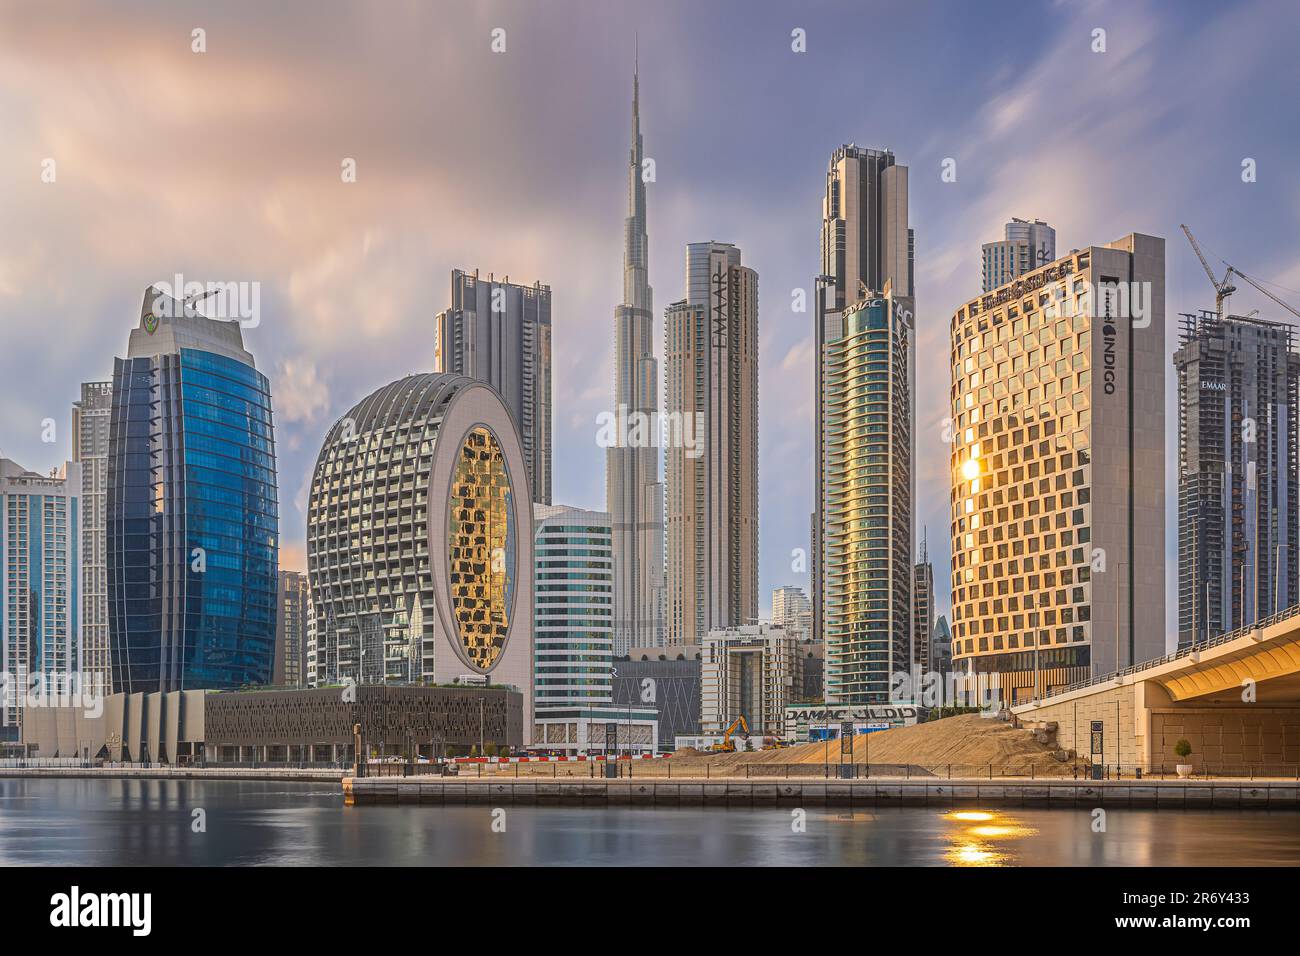 Sunset in Dubai. City center with commercial buildings and skyscrapers around Burj Khalifa. Skyline in the evening at sunset with a cloudy sky. Stock Photo